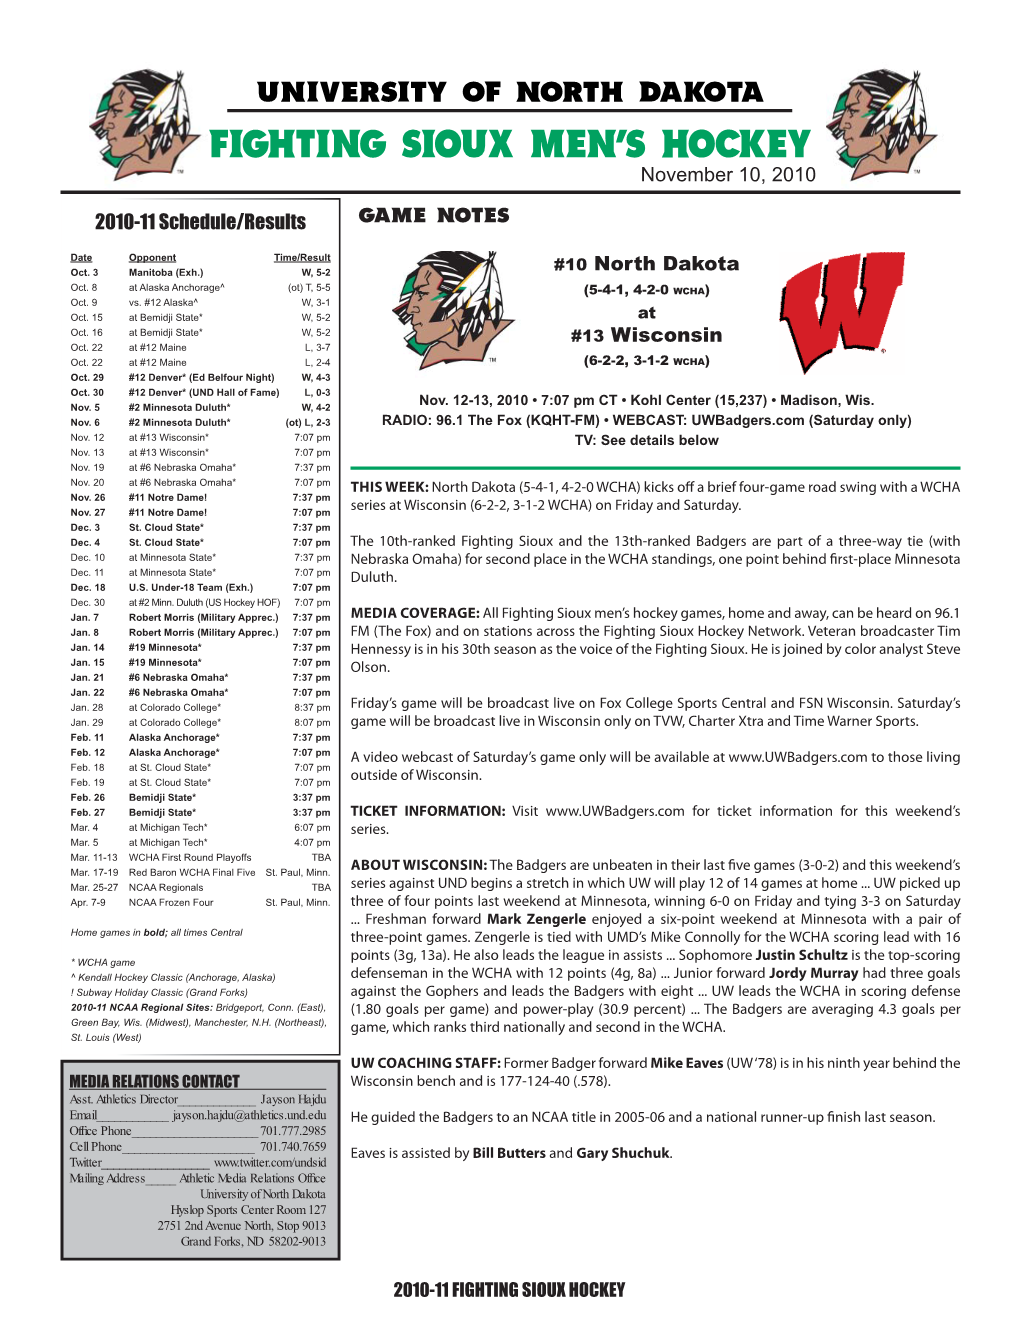 Game Notes 11.12-13.10 at Wisconsin.Indd